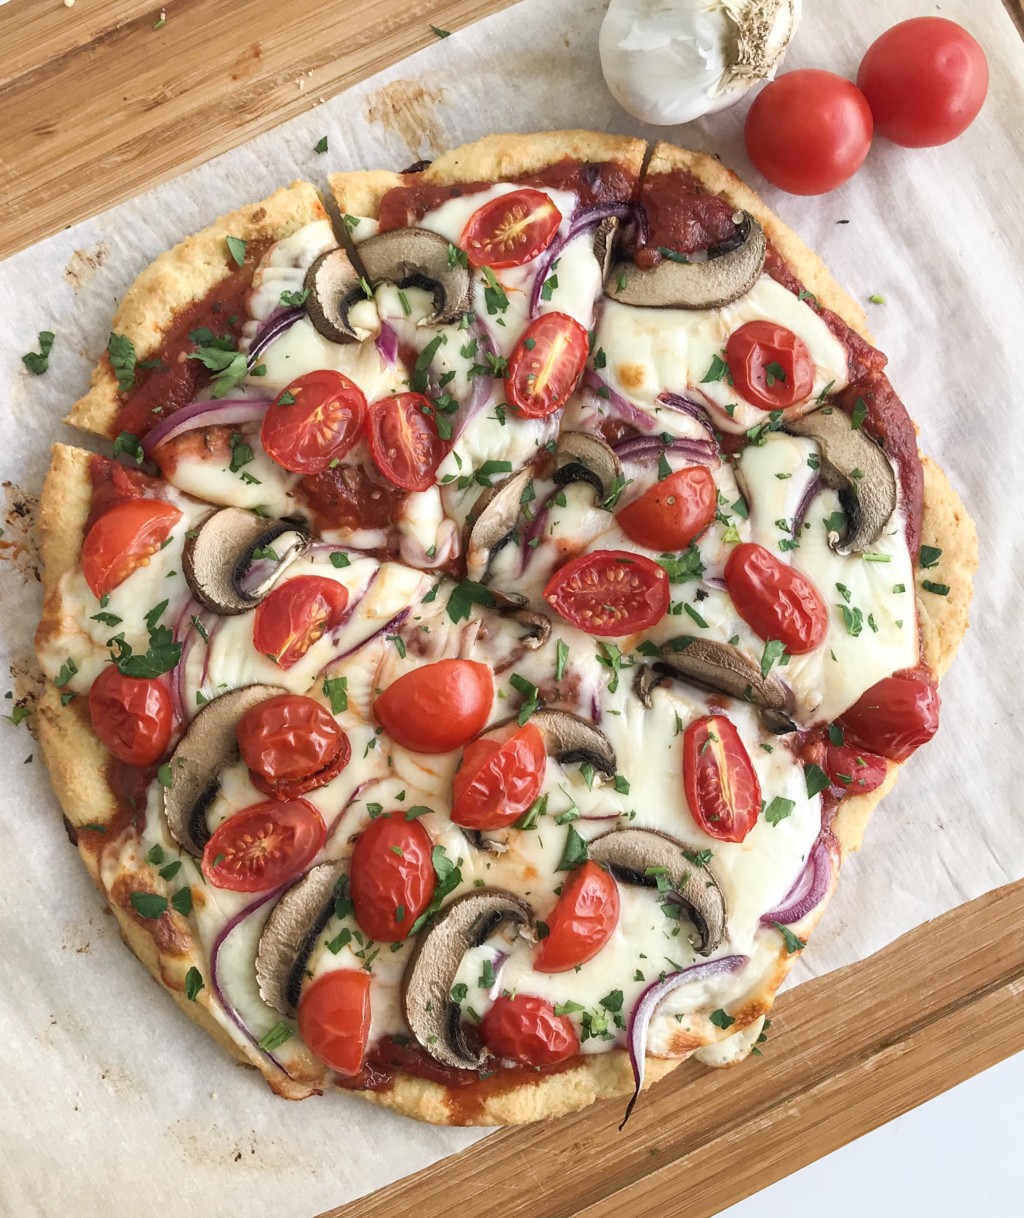 Paleo Pizza2 Pizza Night: Homemade Pizza Made Paleo & Sure to Please Your Crowd! Whitney Khan Contributor Miami Moms Blog